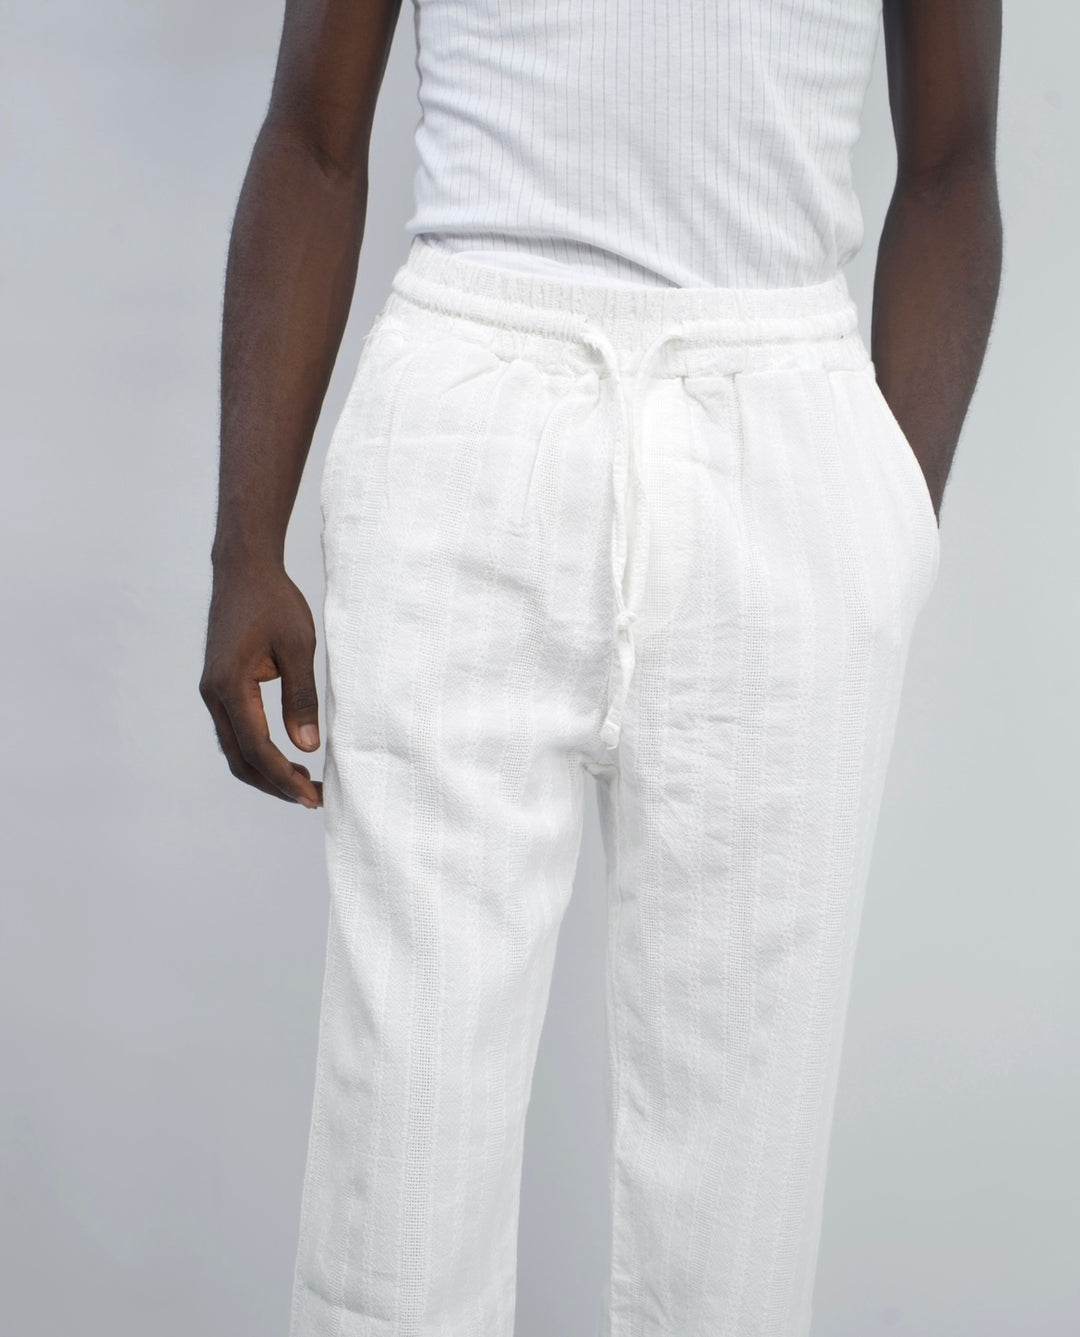 Giesto cable knit tall pants in white